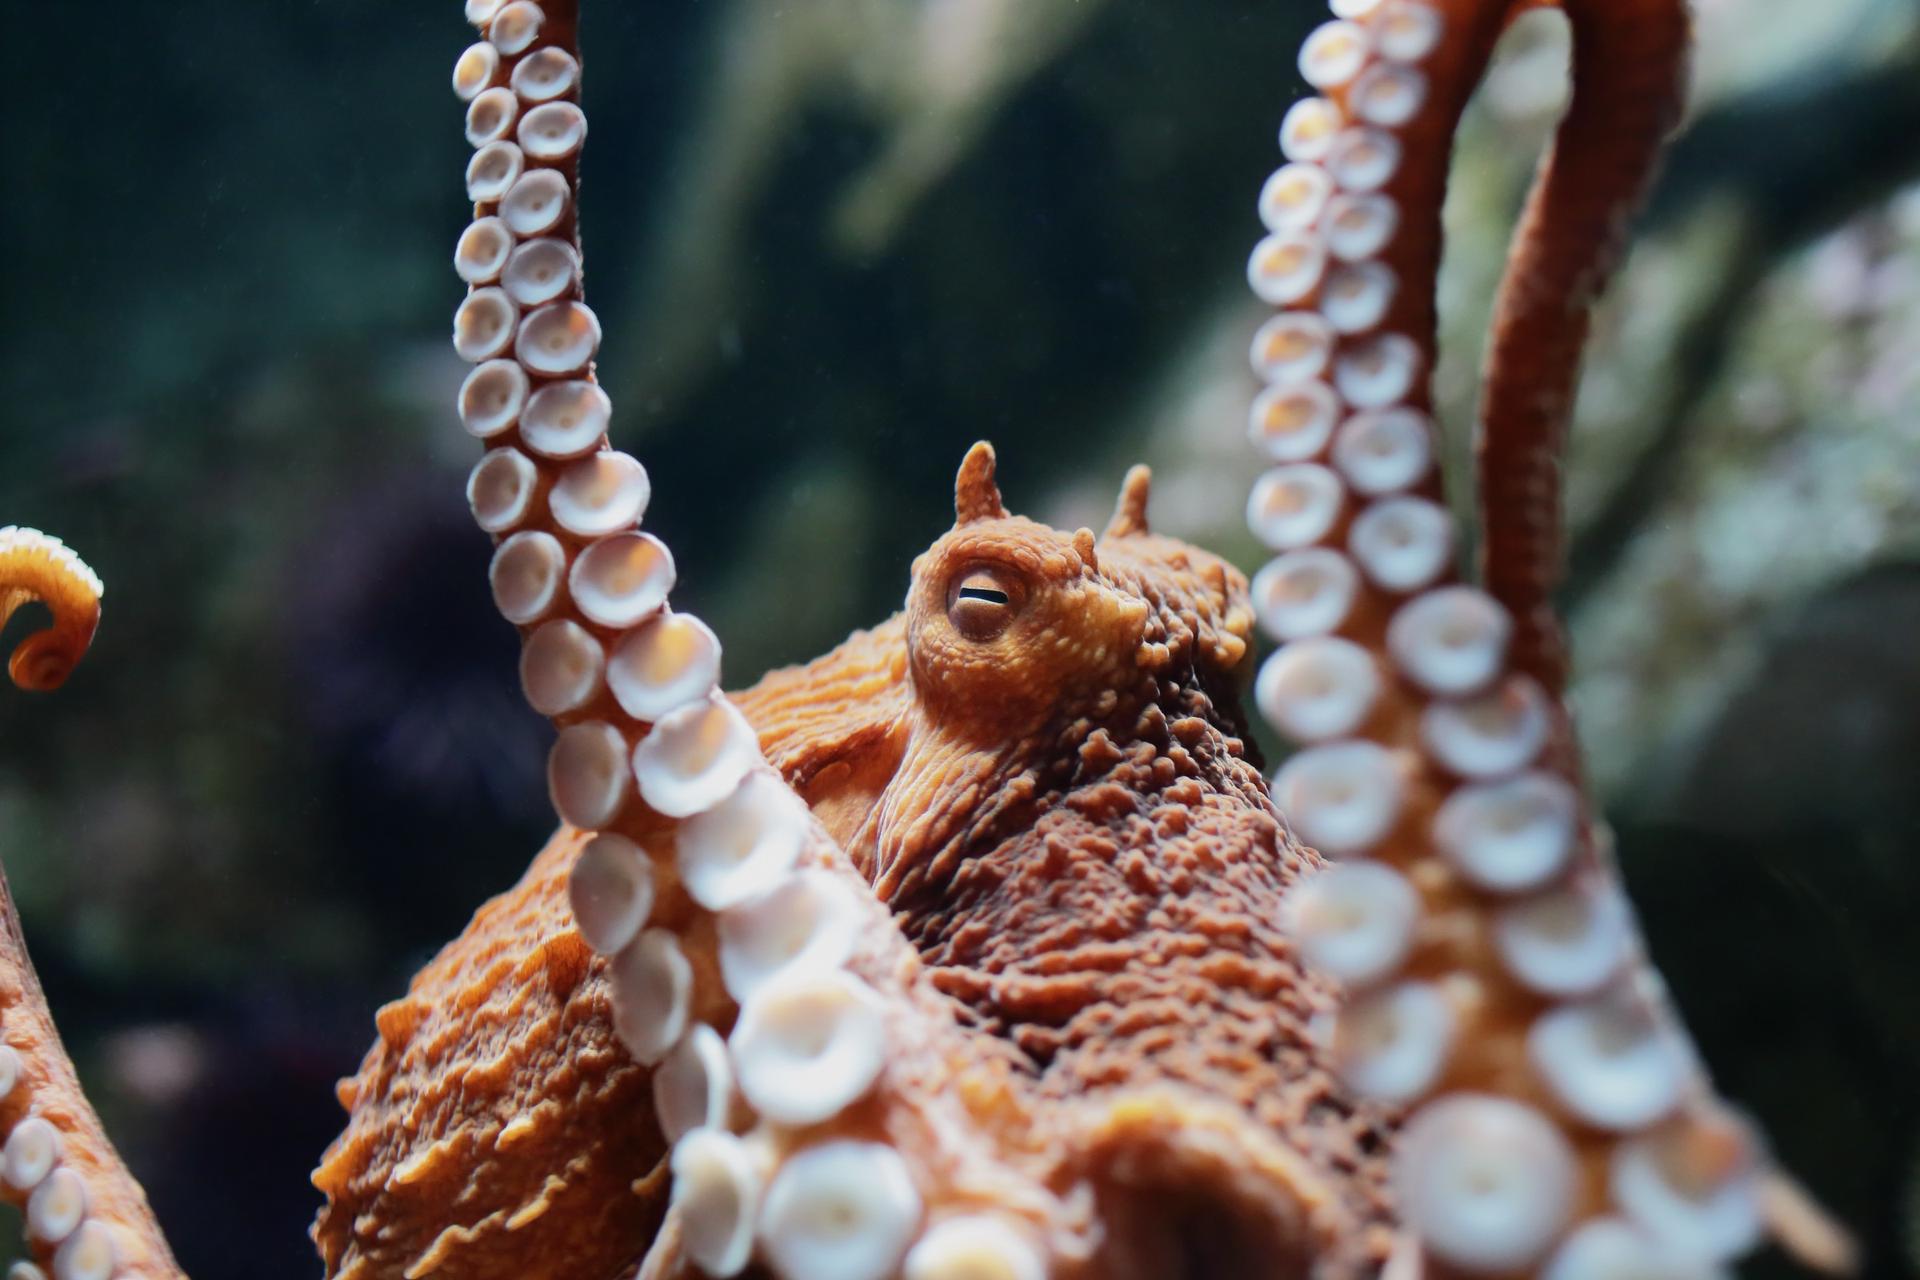 The largest octopus species in the world lives in the Salish Sea!